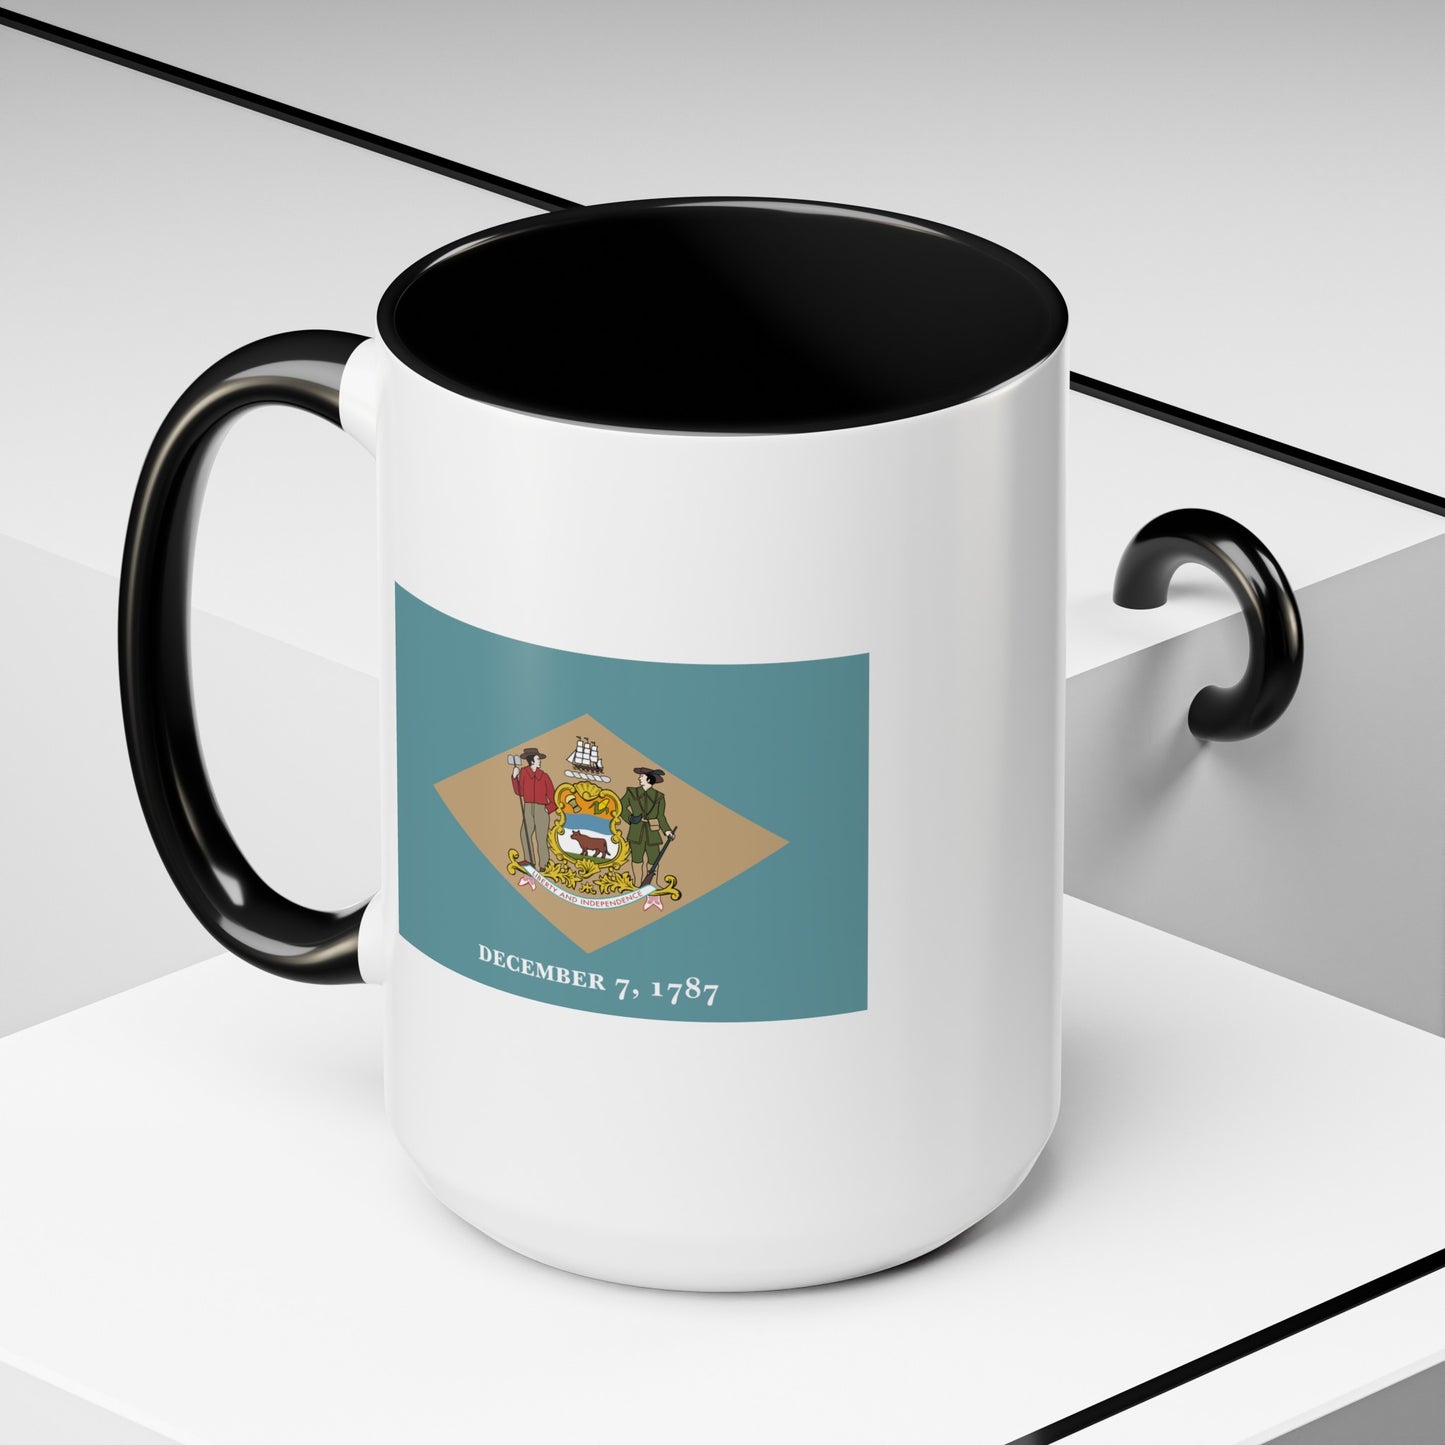 Delaware State Flag - Double Sided Black Accent White Ceramic Coffee Mug 15oz by TheGlassyLass.com